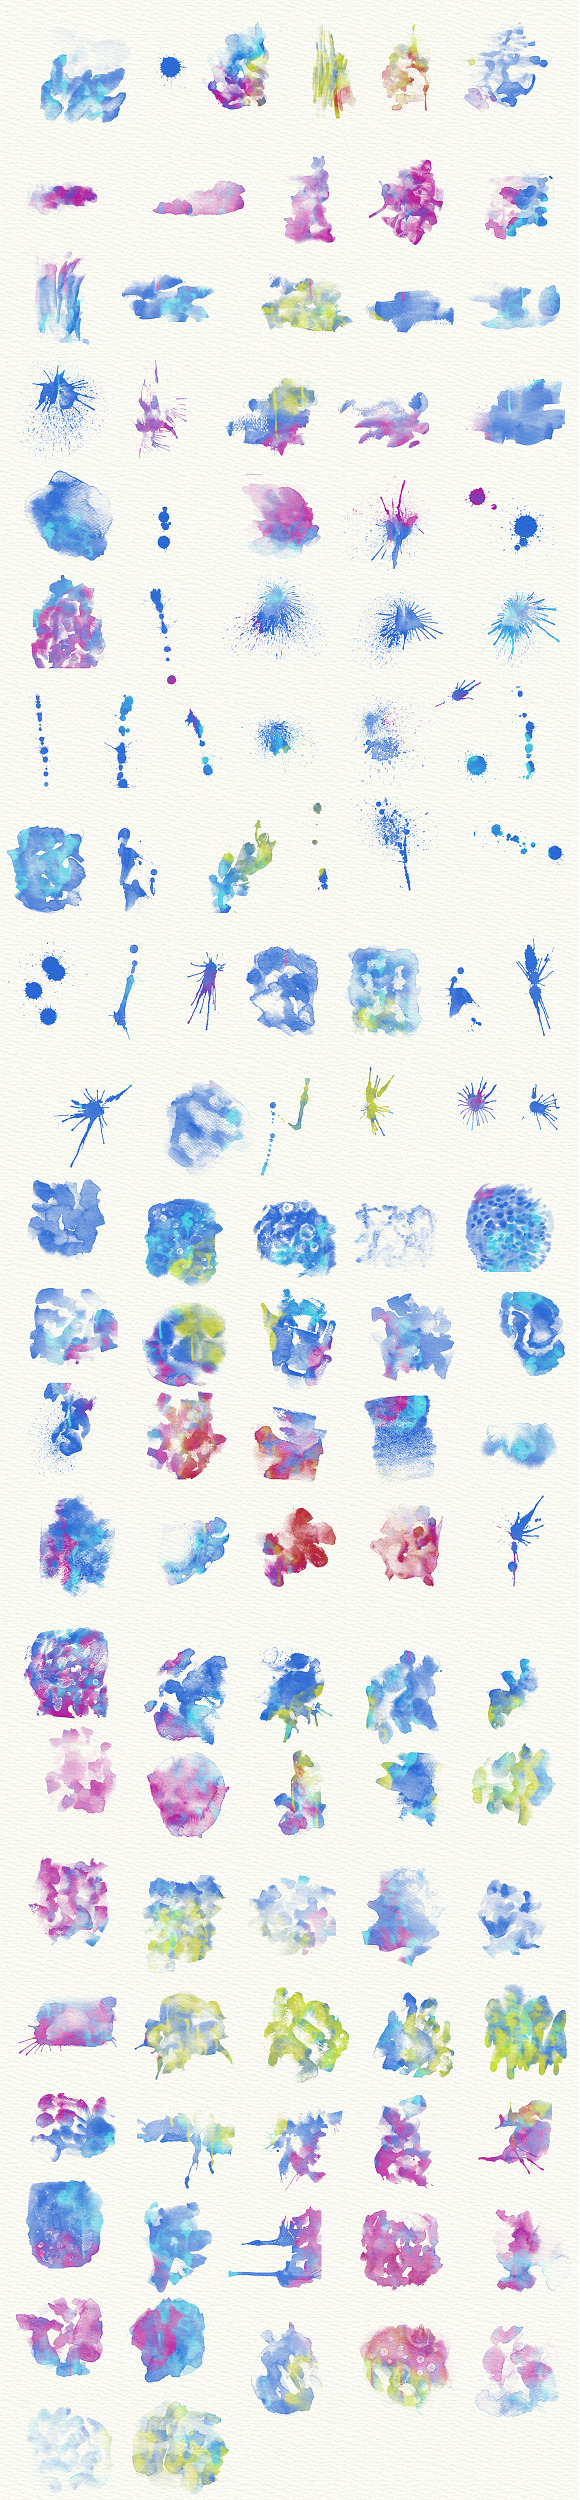 117 Watercolor Brushes in Photoshop Brushes - product preview 1